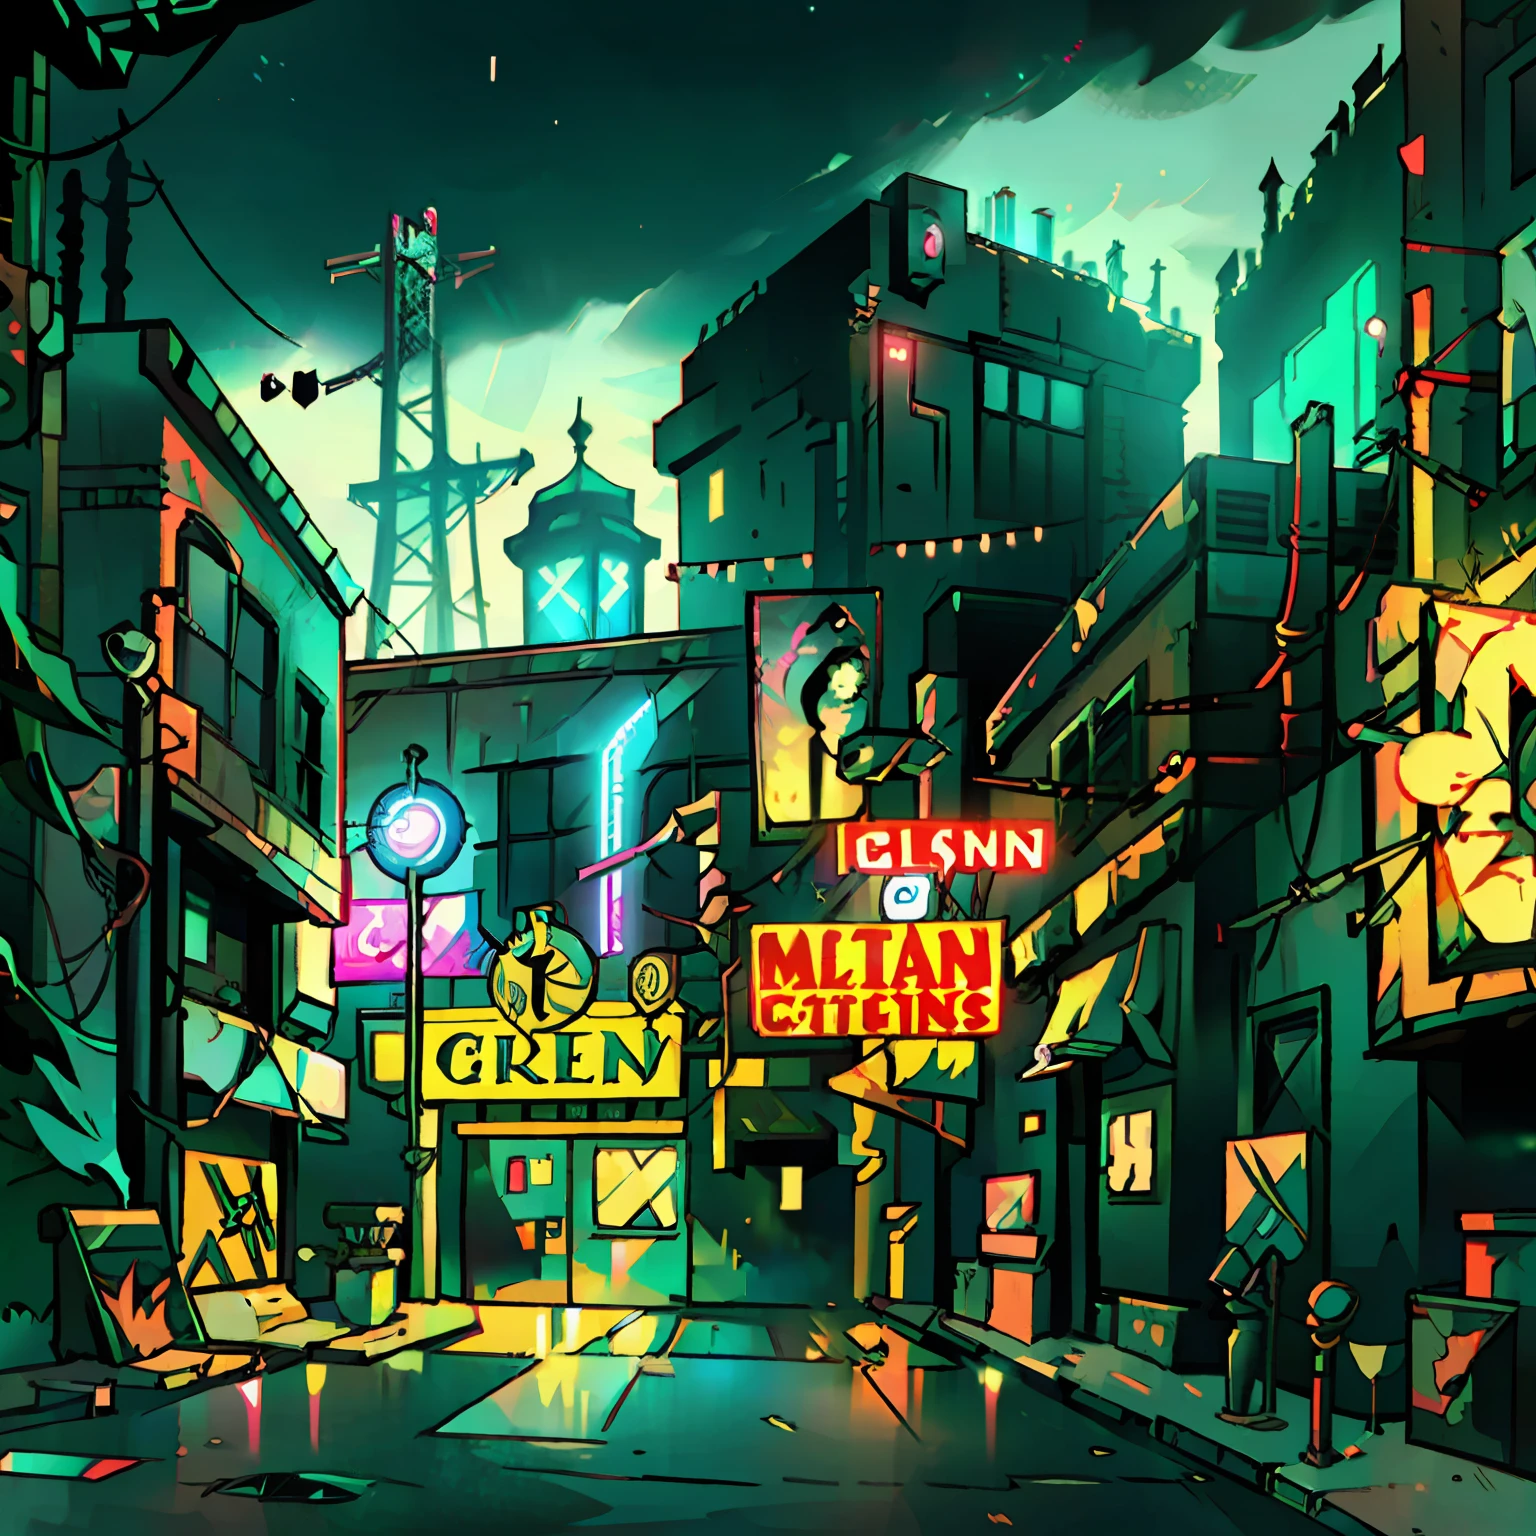 Illustration of a Cyberpunk Cityscape at Night with Skyscrapers, Neon Lights, Billboards, Cars, Theater Marquee, & Electric Wires. Retro Video Game Pixelart City. [Sci-Fi, Fantasy, Historic]